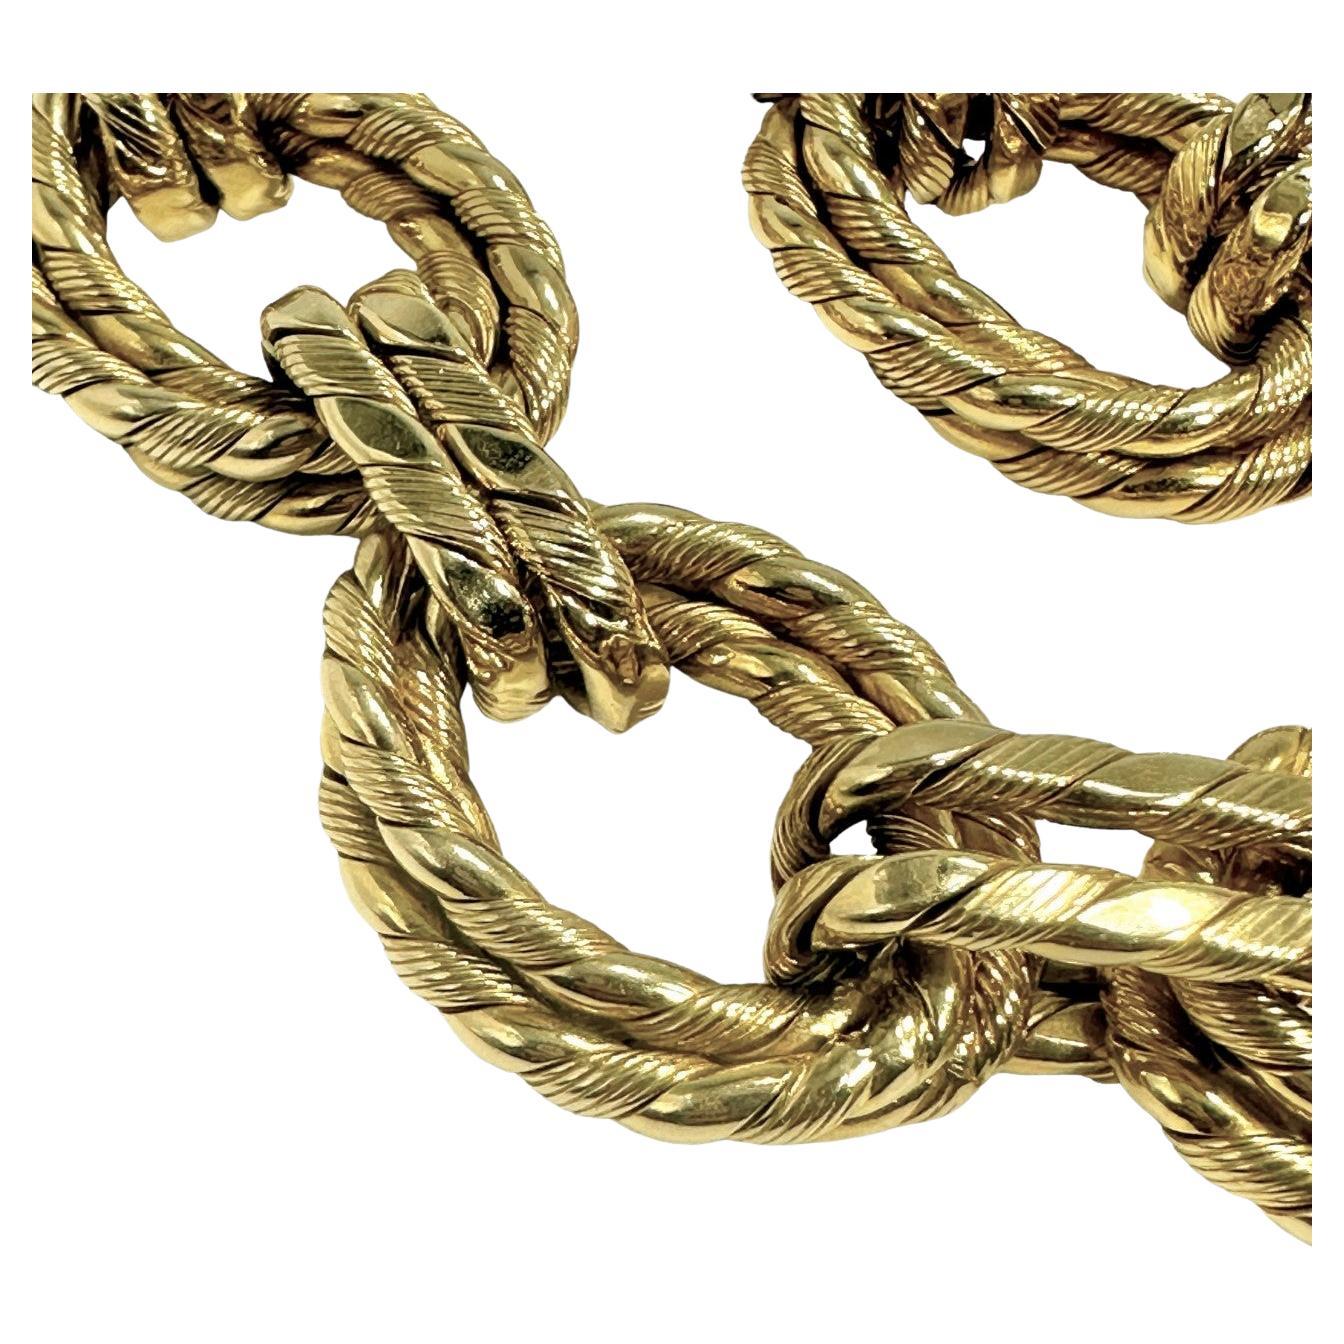 This outstanding large link 14k yellow gold necklace and bracelet combination could only have been imagined and created in Italy. In bold style, scale, and quality of manufacture, it is absolutely 